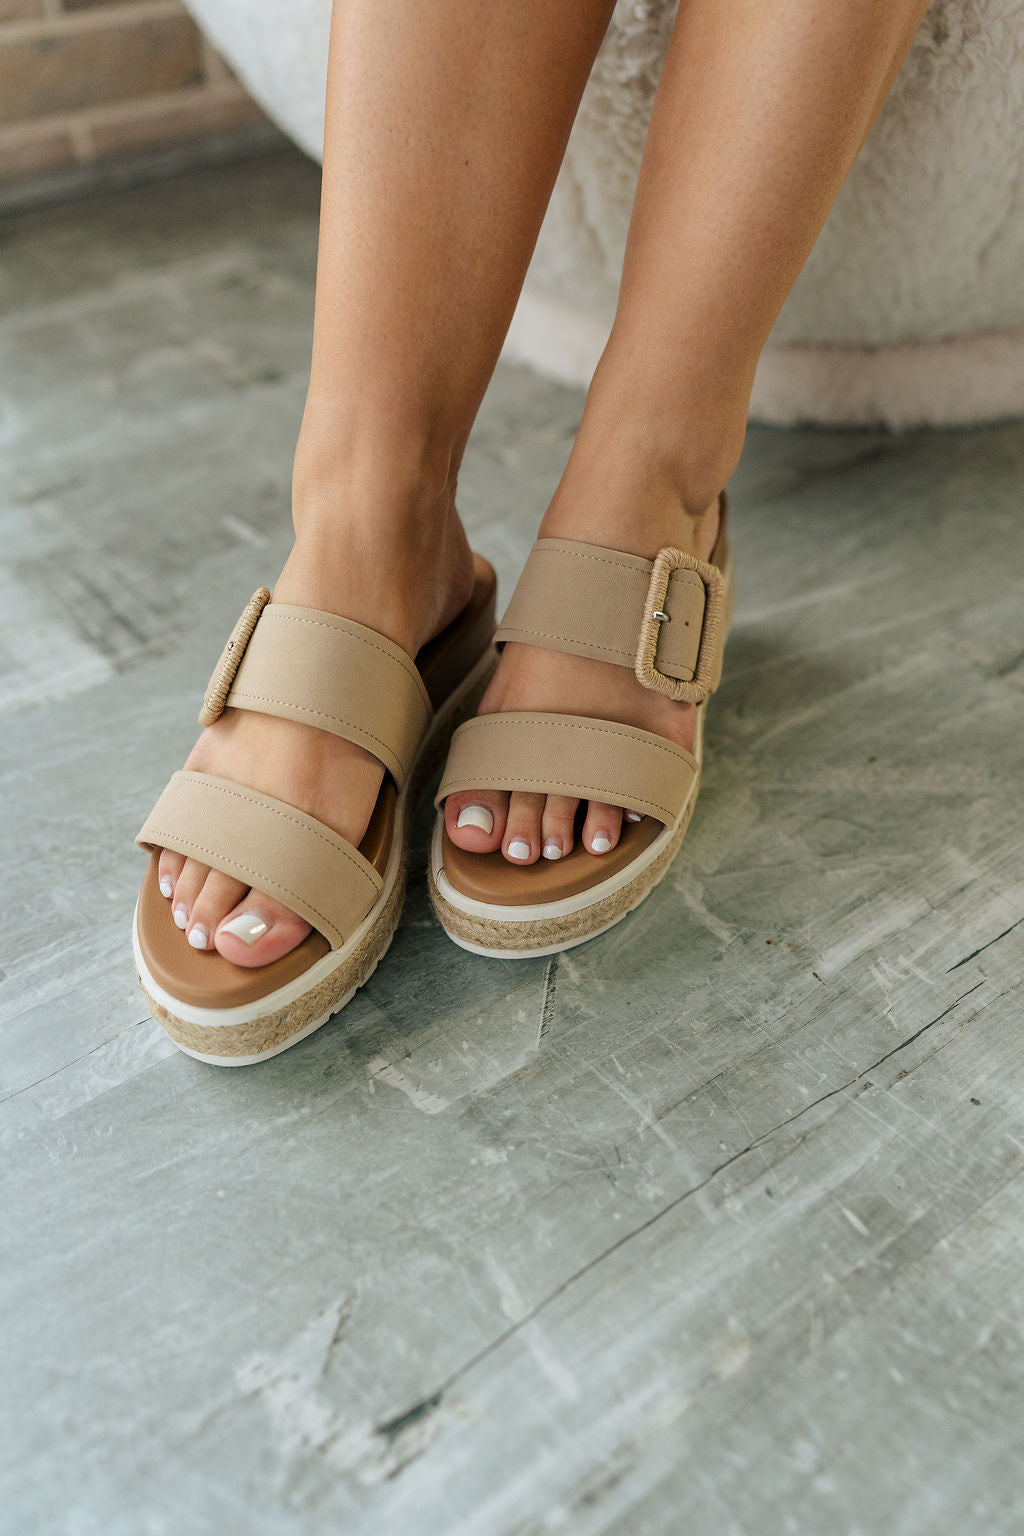 Front view of female model wearing the Kenzy Sandal which features Upper Leather Fabric, Two Straps with Adjustable Buckle Closure, Espadrille Details with White Sole and 2.3 inch heel.